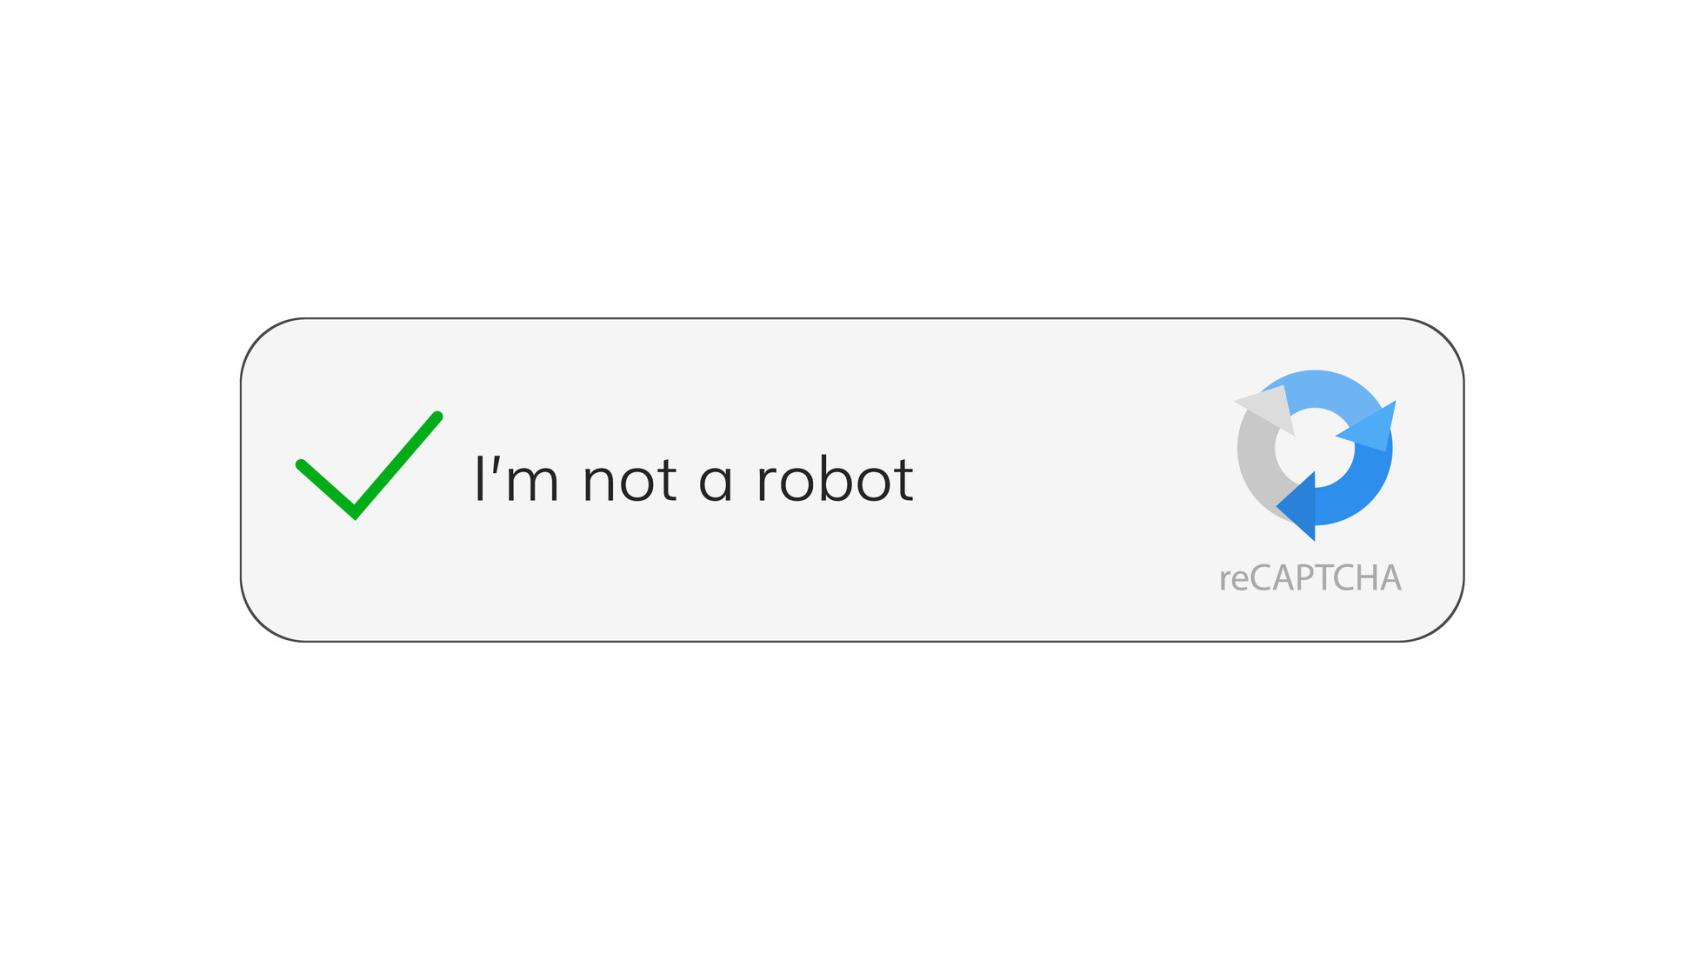 CAPTCHA son las siglas de 'Completely Automated Public Turing test to tell Computers and Humans Apart'.